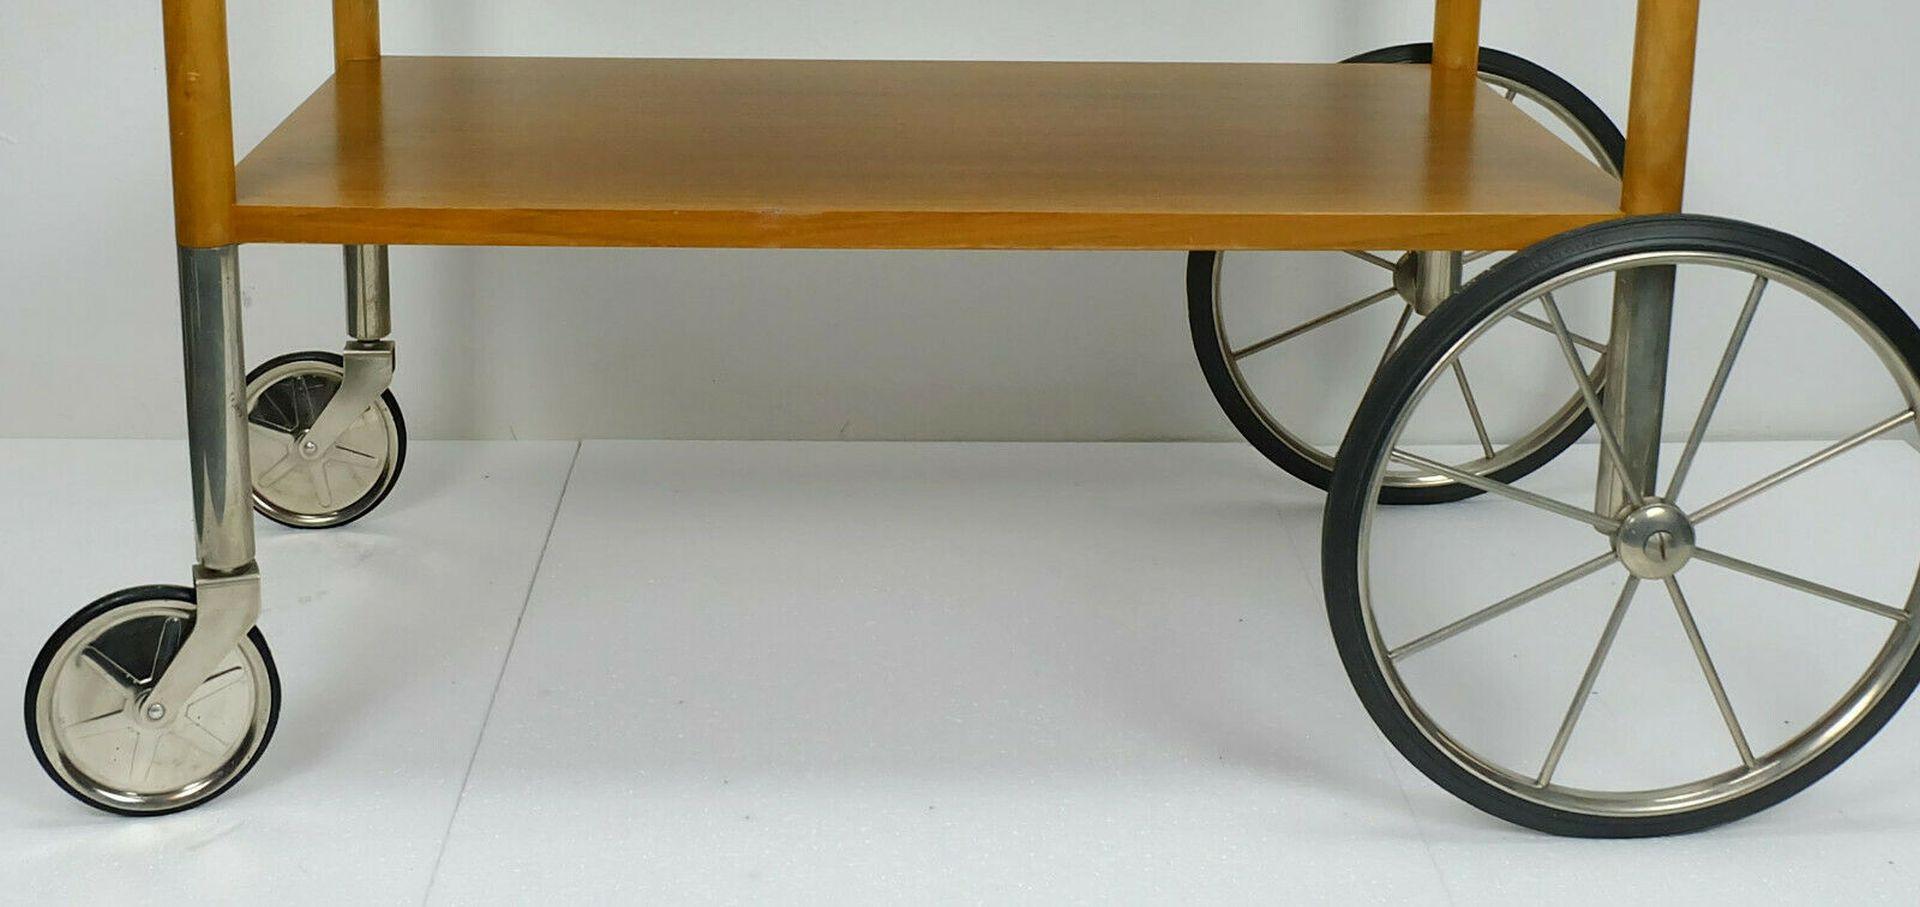 Rare 1960s tea cart manufactured by Wilhelm Renz Furniture Company. Outstanding design with 2 large and 2 small wheels. Made of walnut (solid and veneer) and nickel plated metal. The wheels are made of metal and rubber.

Pre-used, good vintage